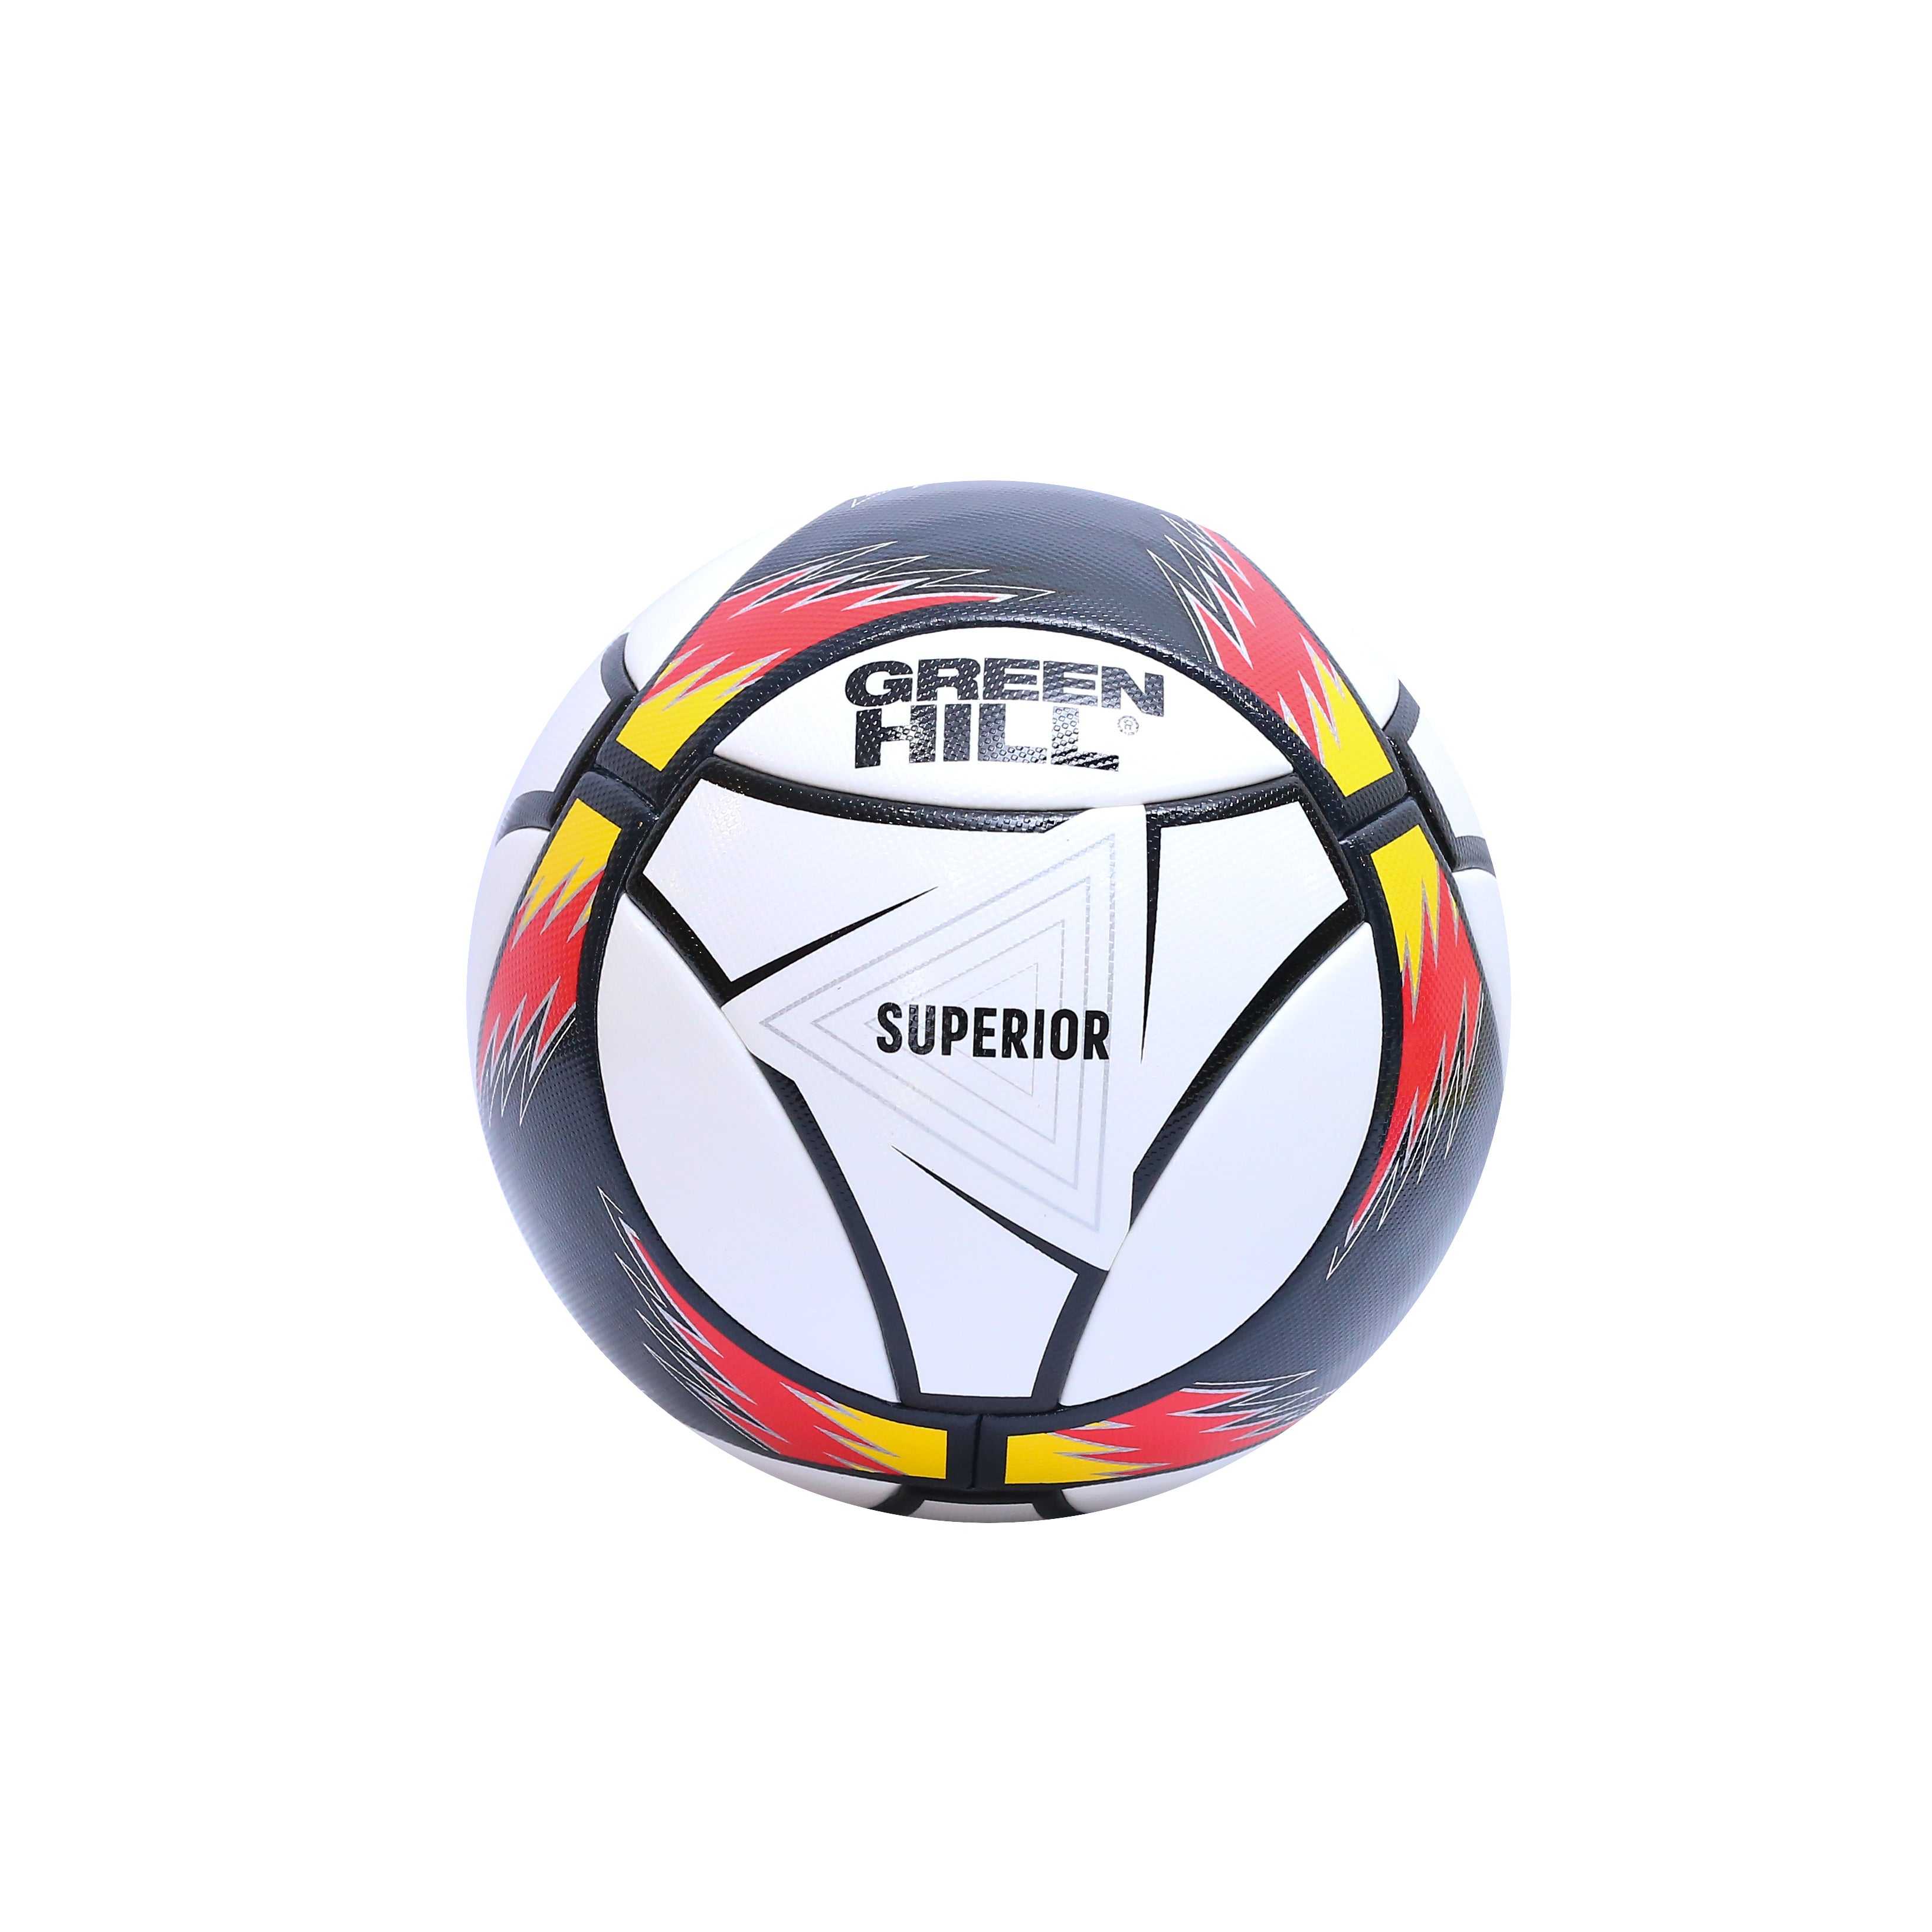 "SUPERIOR" FIFA Approved